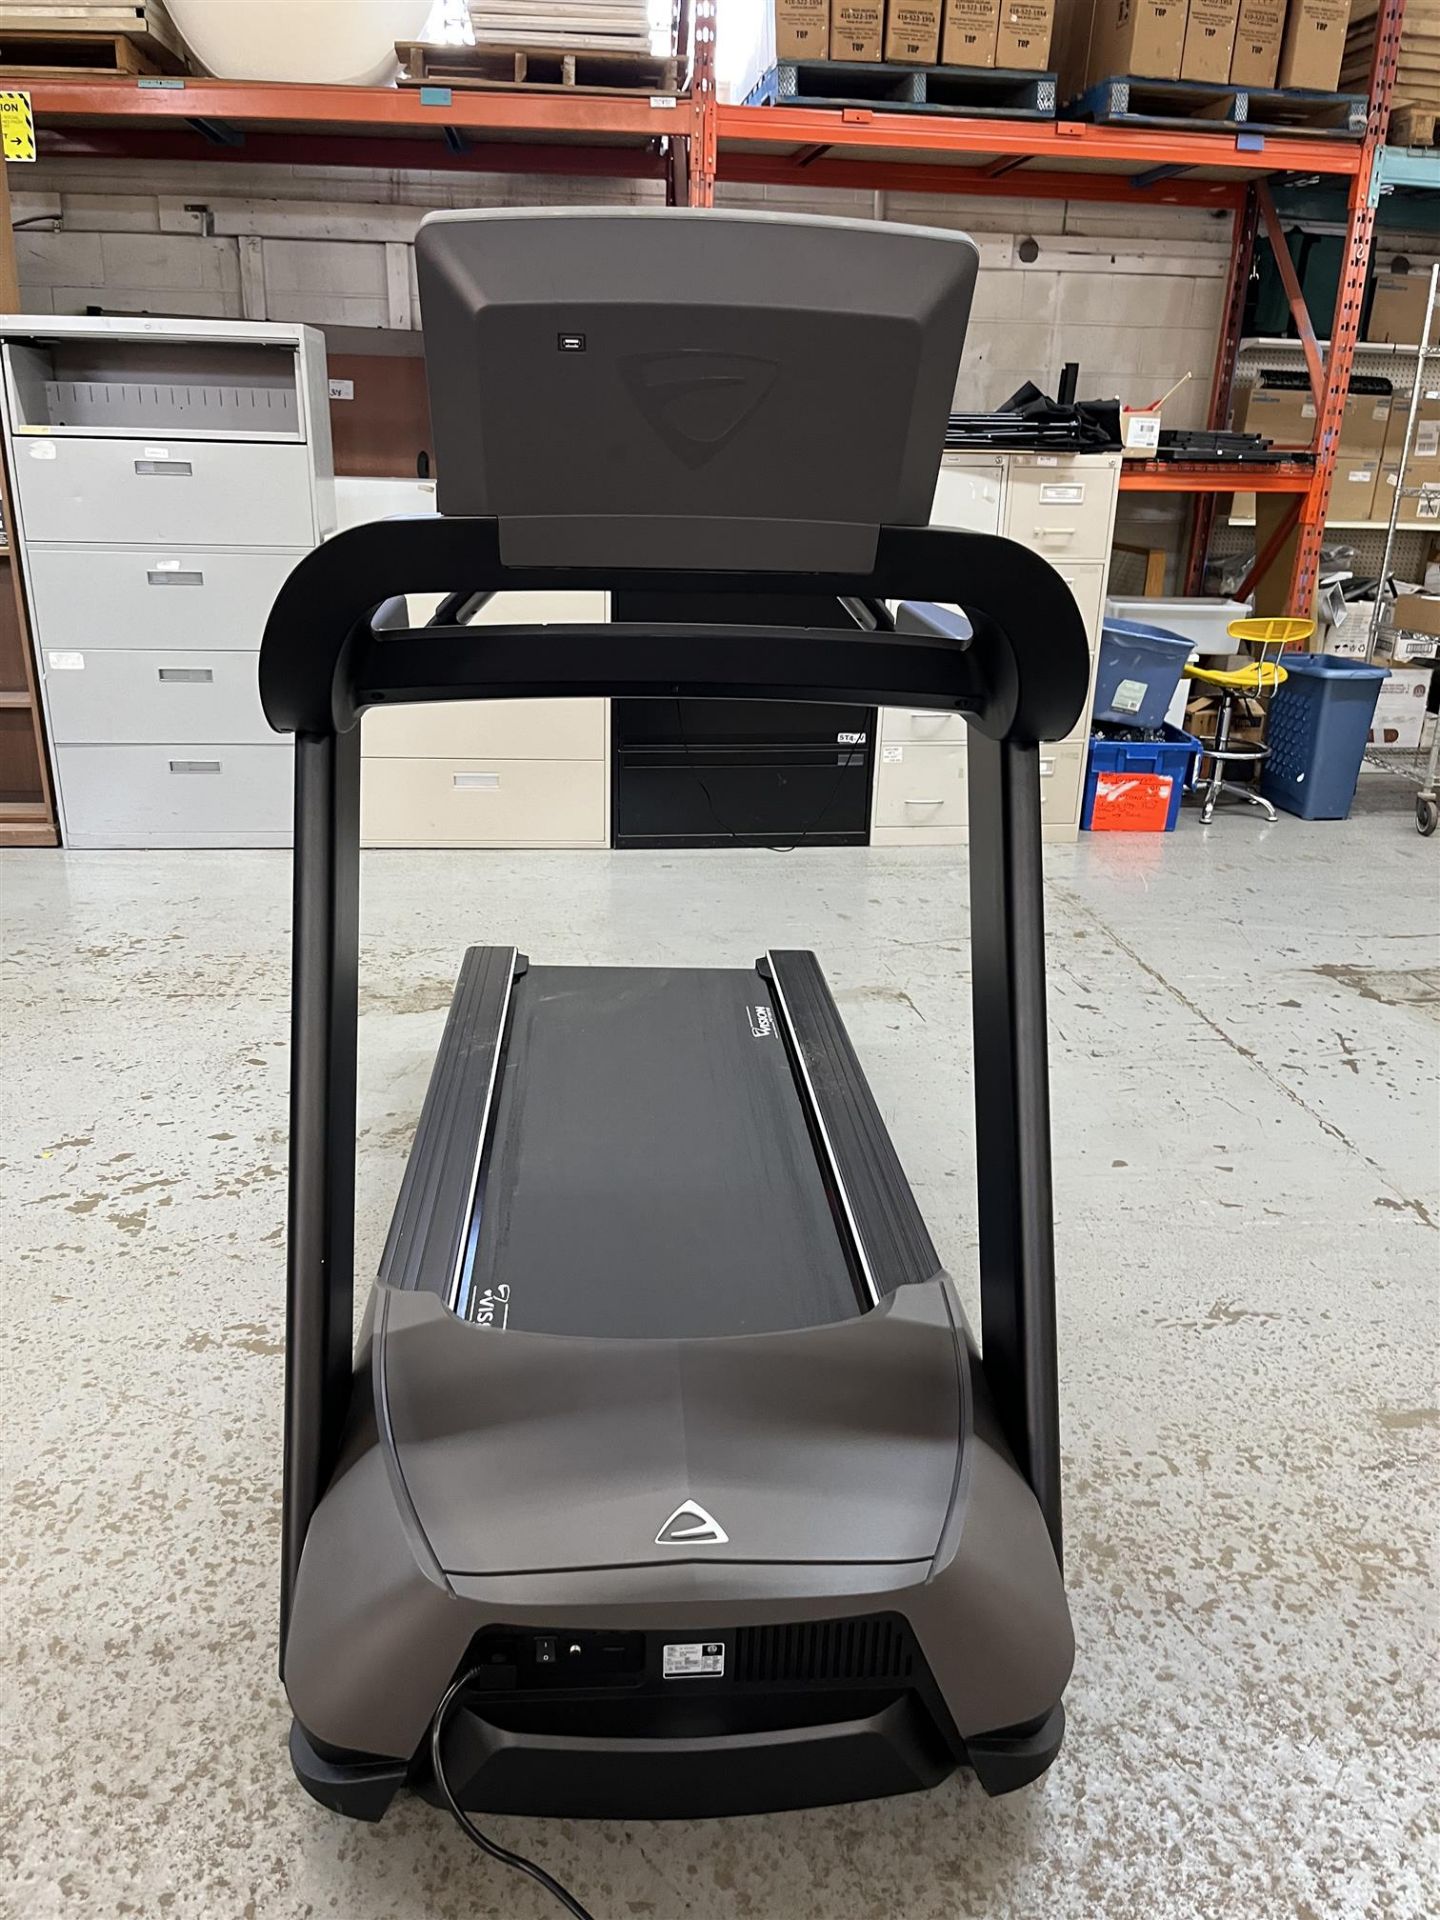 Vision Fitness Treadmill Model: T600, 400lbs, 120Vac Volts, 50-60Hz, Phase 1 - Image 4 of 5